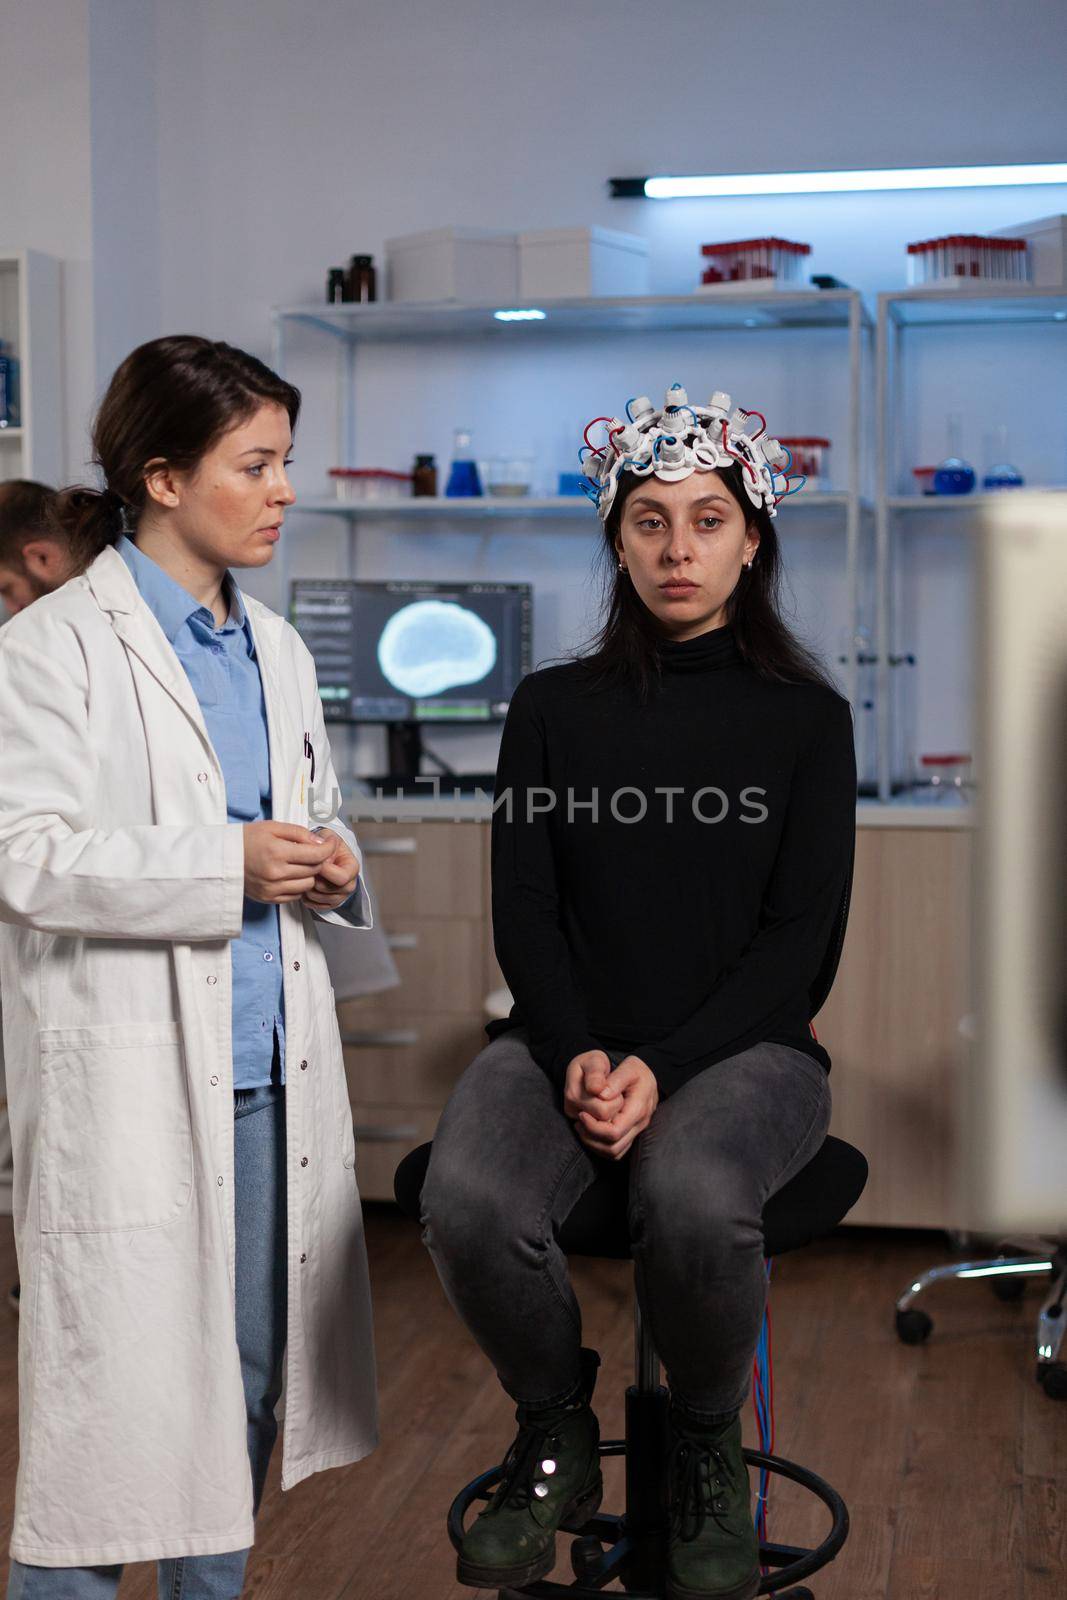 Neurologist doctor showing tomography expertise to woman patient with eeg scanner by DCStudio